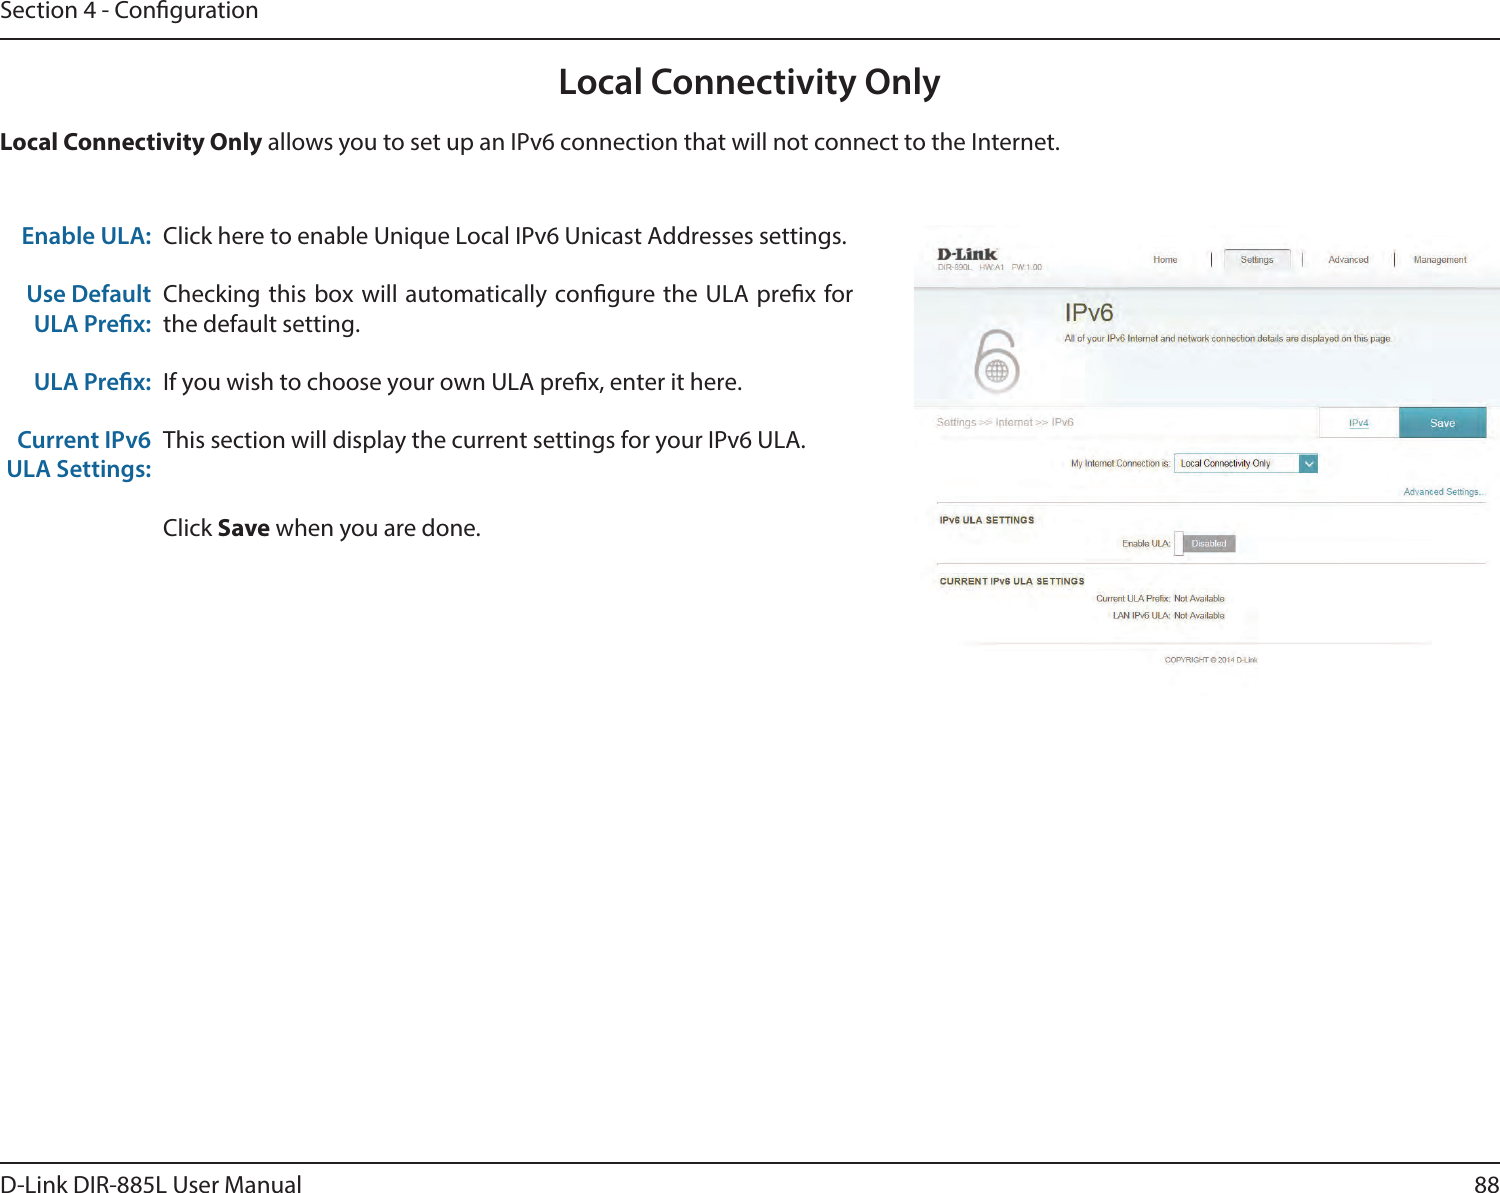 88D-Link DIR-885L User ManualSection 4 - CongurationLocal Connectivity OnlyClick here to enable Unique Local IPv6 Unicast Addresses settings.Checking this box will automatically congure the ULA prex for the default setting.If you wish to choose your own ULA prex, enter it here.This section will display the current settings for your IPv6 ULA.Click Save when you are done.Enable ULA:Use Default ULA Prex:ULA Prex:Current IPv6 ULA Settings:Local Connectivity Only allows you to set up an IPv6 connection that will not connect to the Internet.